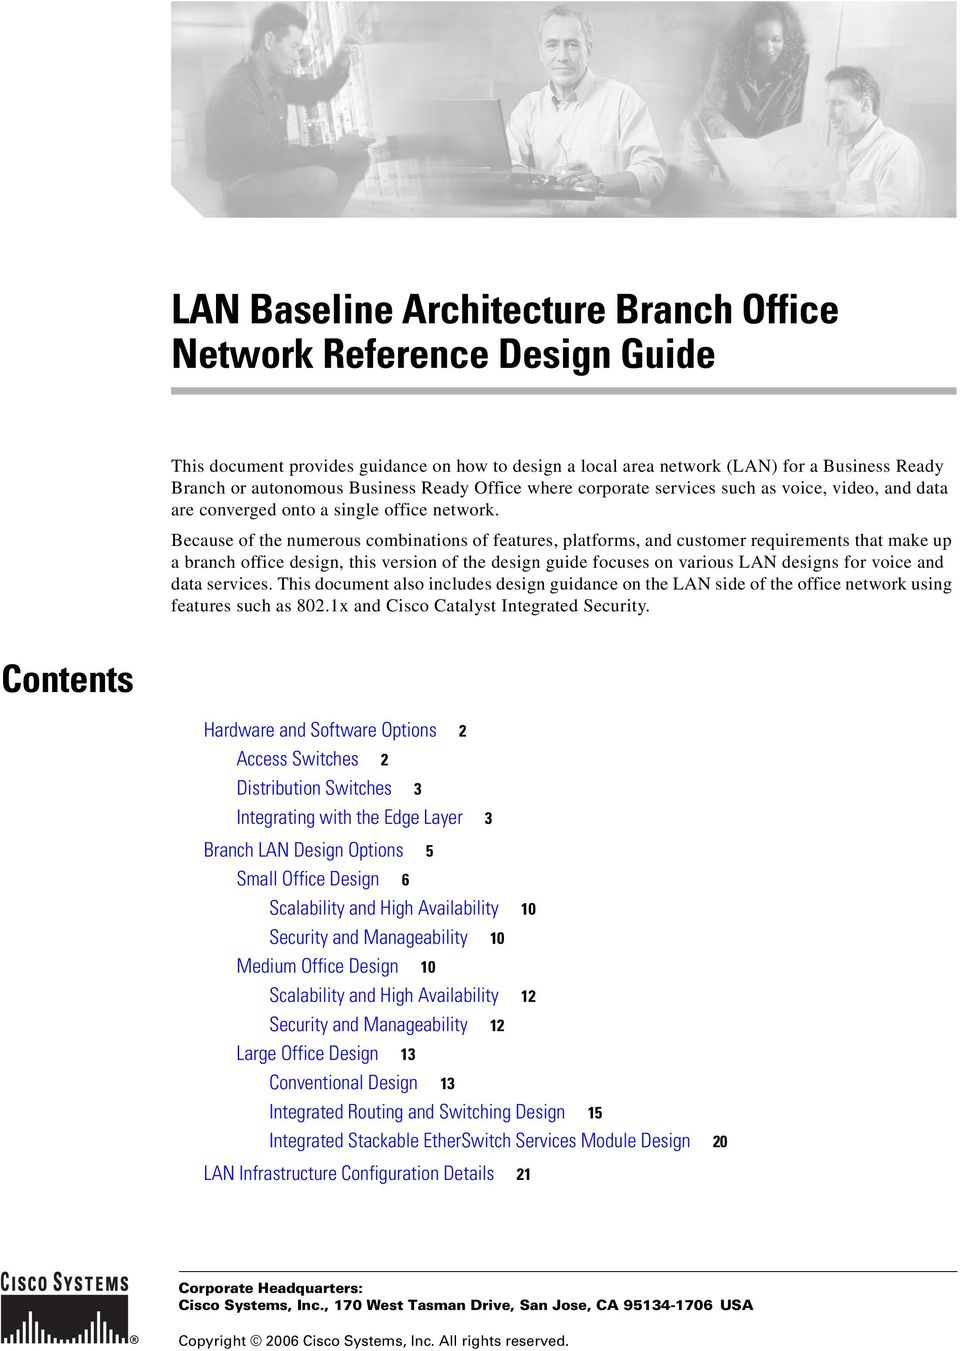 Because of the numerous combinations of features, platforms, and customer requirements that make up a branch office design, this version of the design guide focuses on various LAN designs for voice